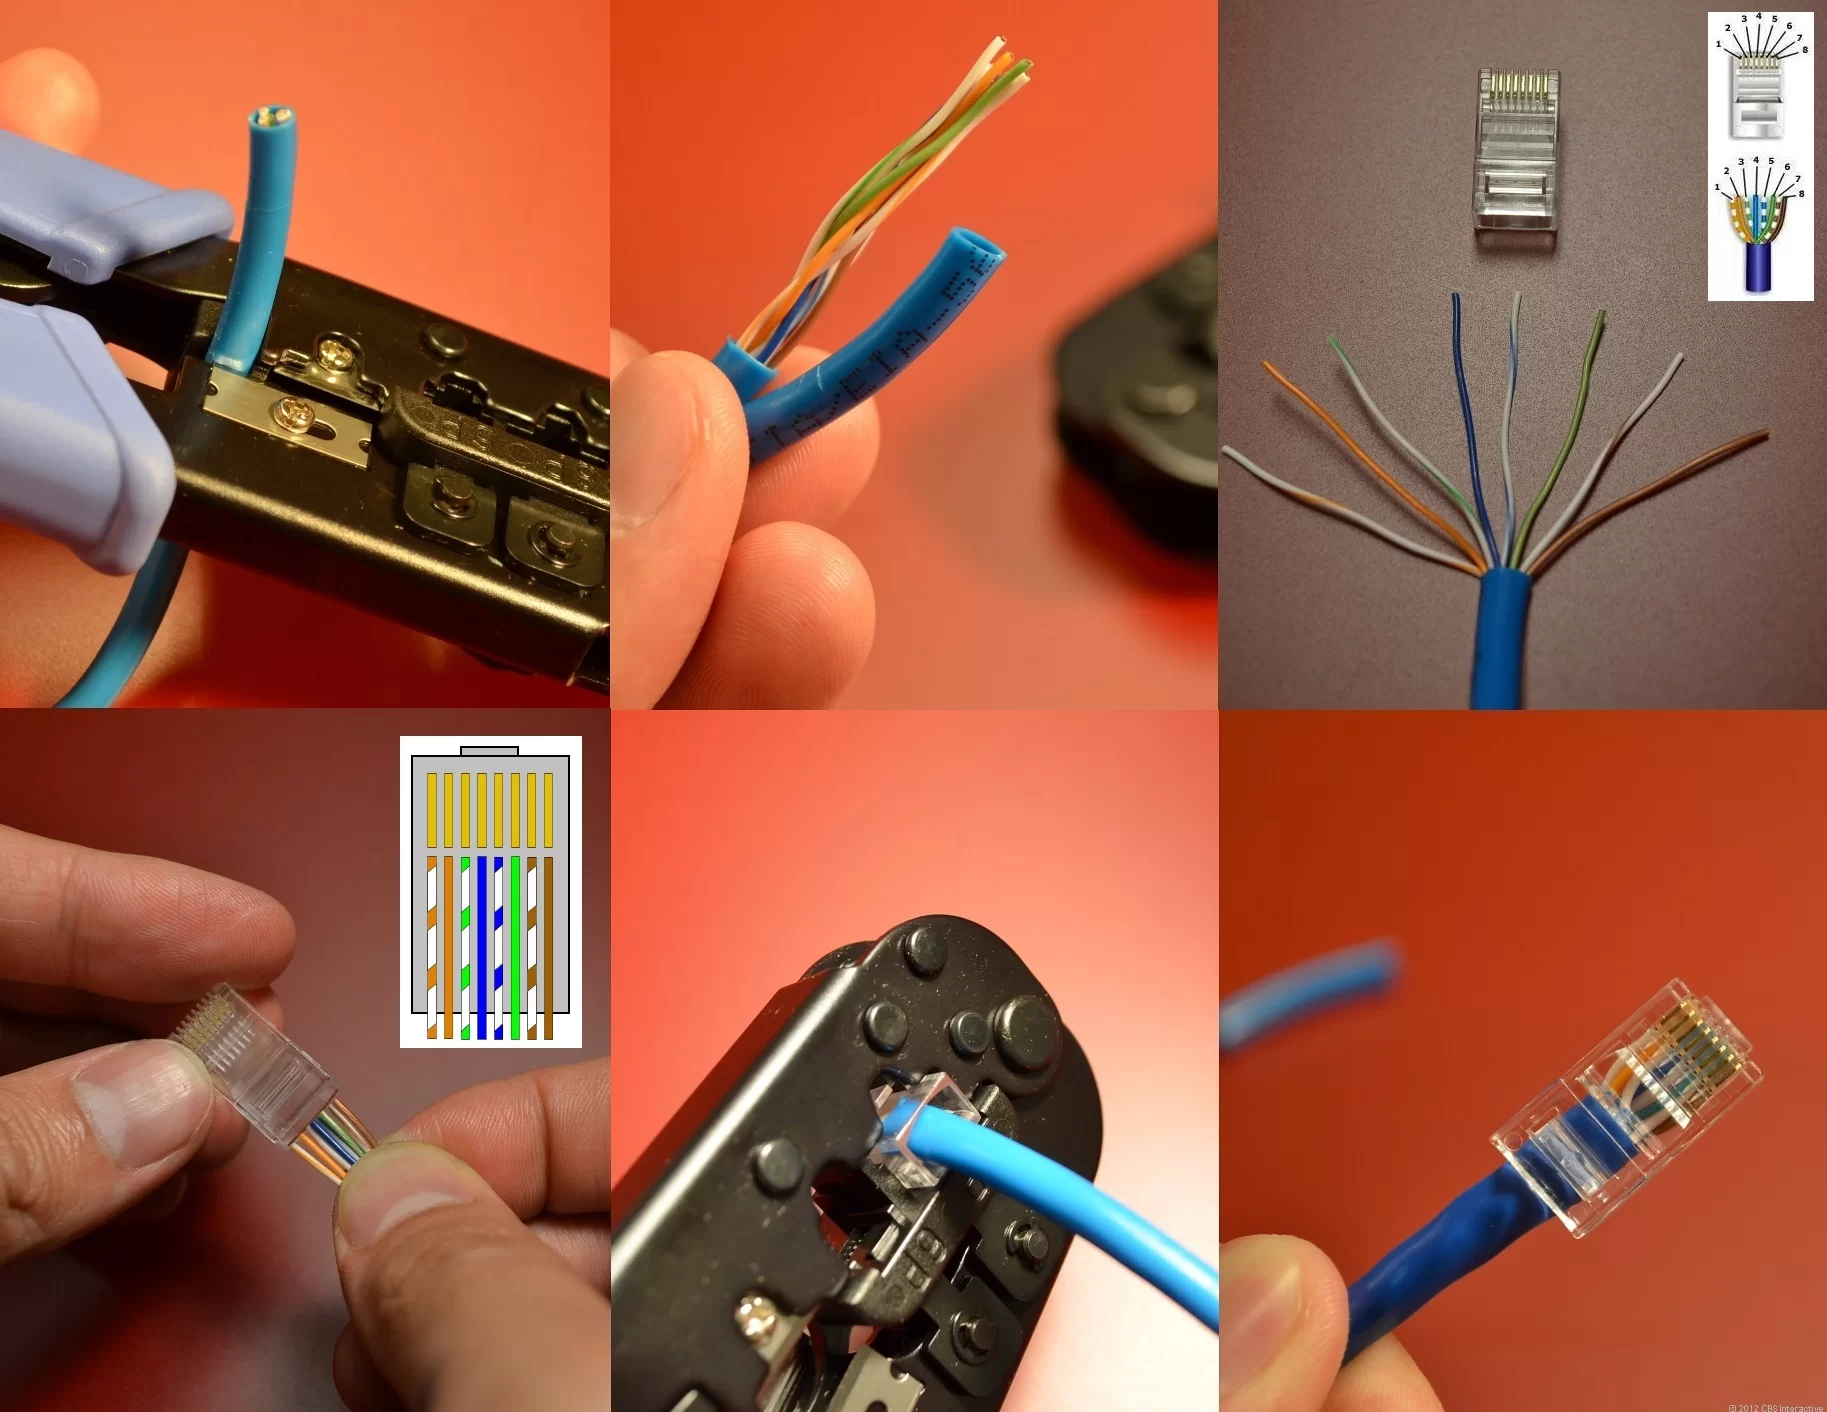 RJ45 Jack Cable Colors and Connection